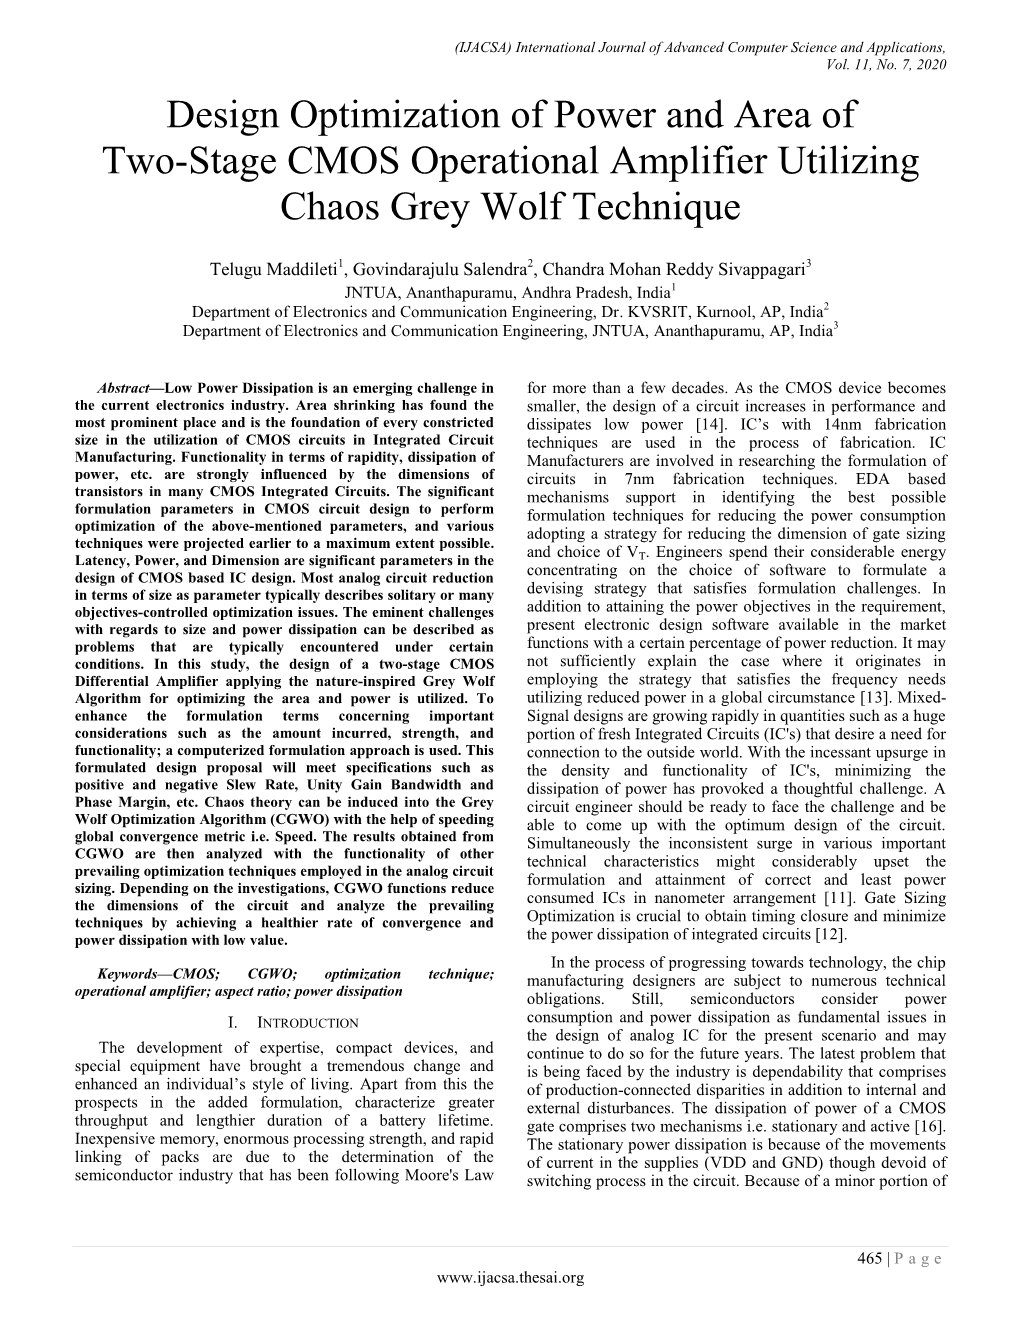 Design Optimization of Power and Area of Two-Stage CMOS Operational Amplifier Utilizing Chaos Grey Wolf Technique